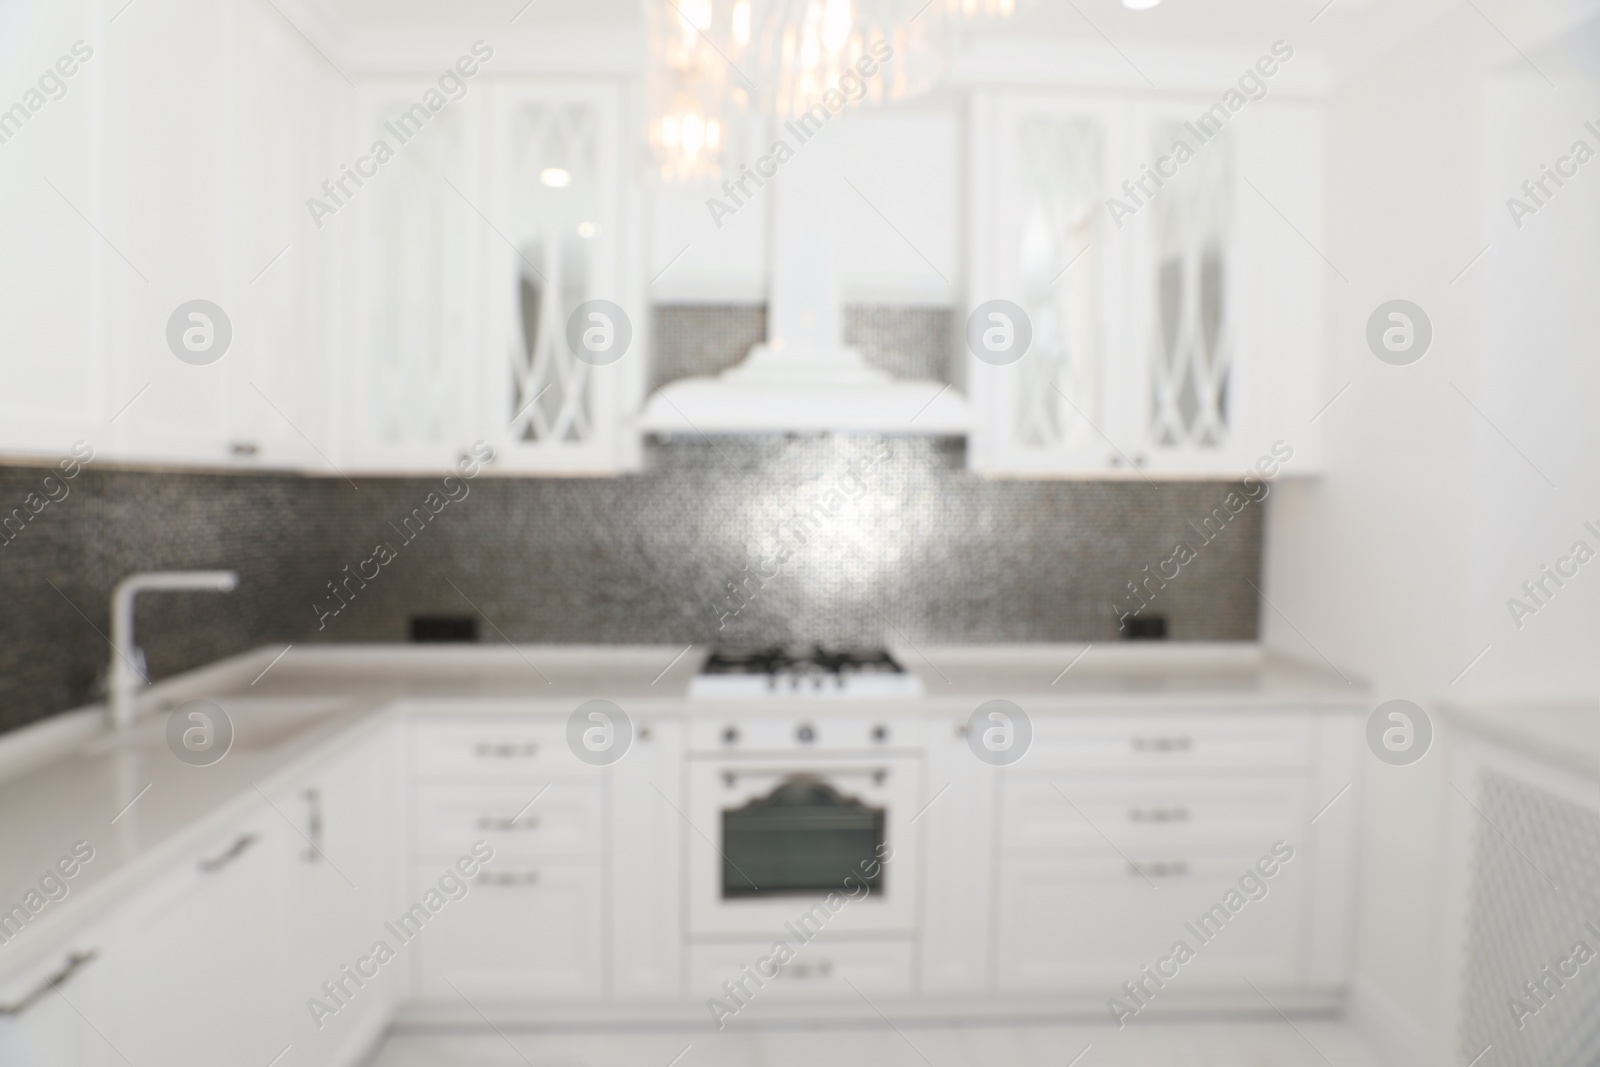 Photo of Blurred view of beautiful kitchen interior with new stylish furniture